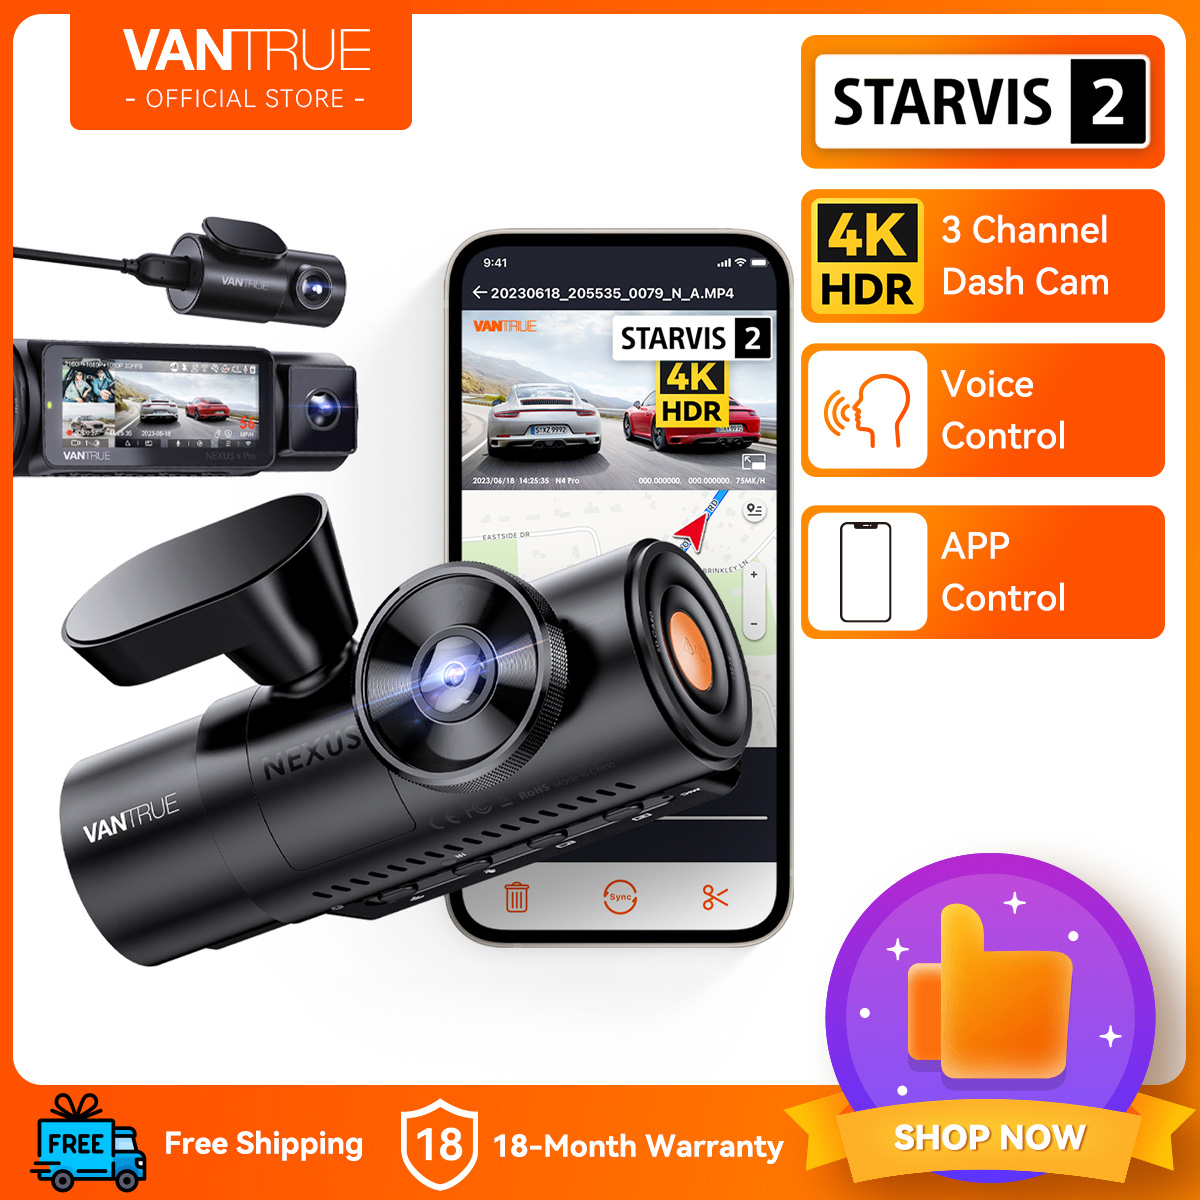 Vantrue N4 Pro 3 Channel 4K WiFi Dash Cam, STARVIS 2 IMX678 Night Vision, 4K+1080P+1080P  Front Inside and Rear Triple Dash Camera for Car, Voice Control, GPS, 4K  HDR, 24H Parking Mode